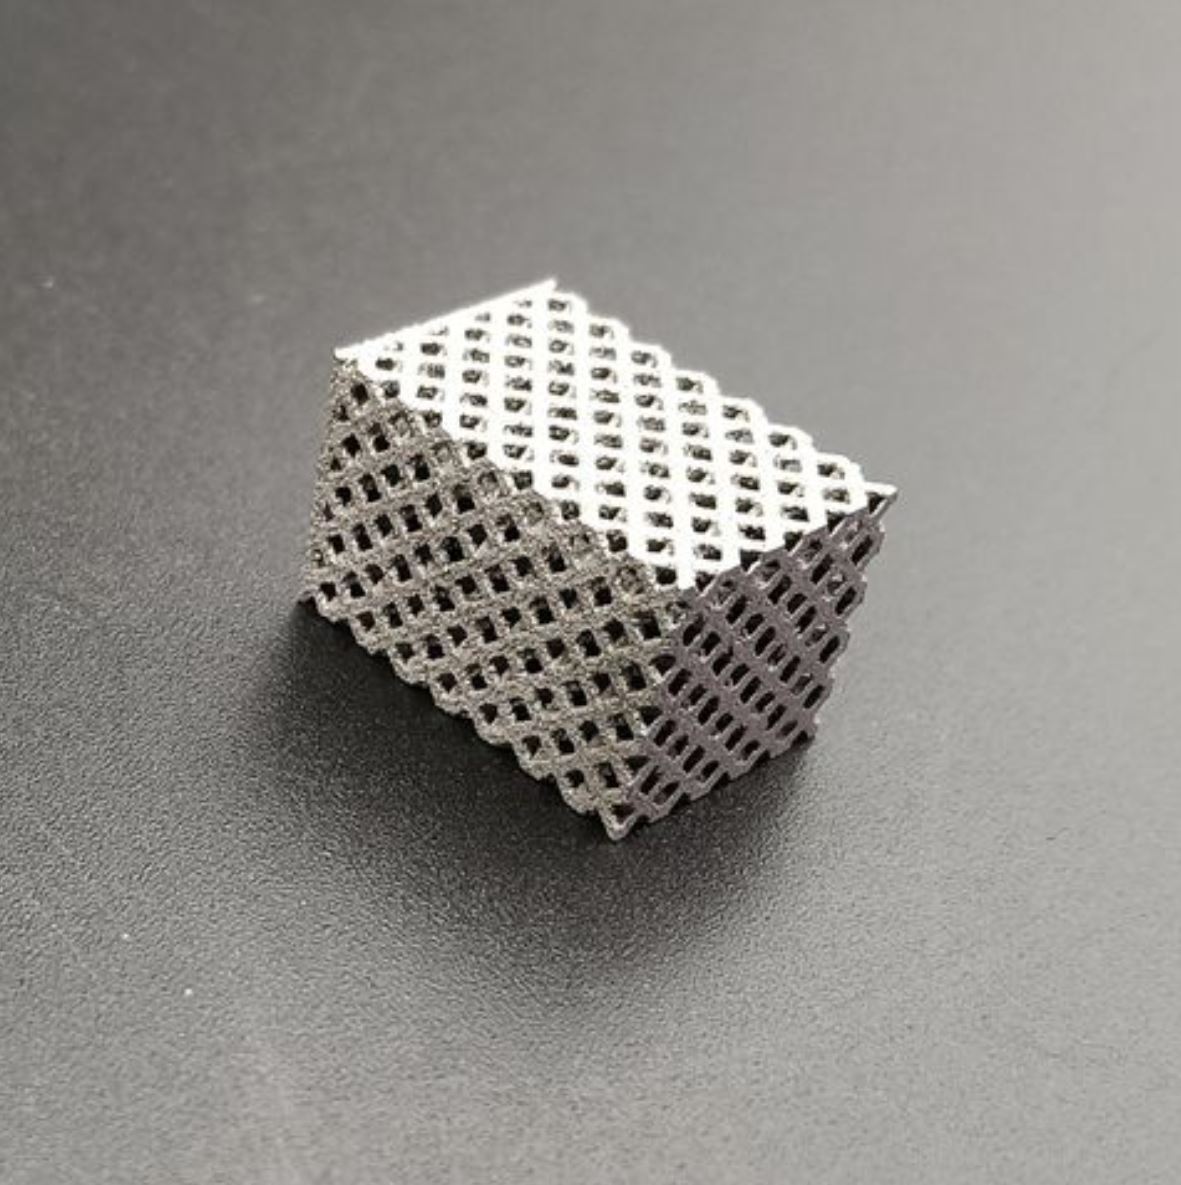 Stainless Steel Alloy Powder 3D printing